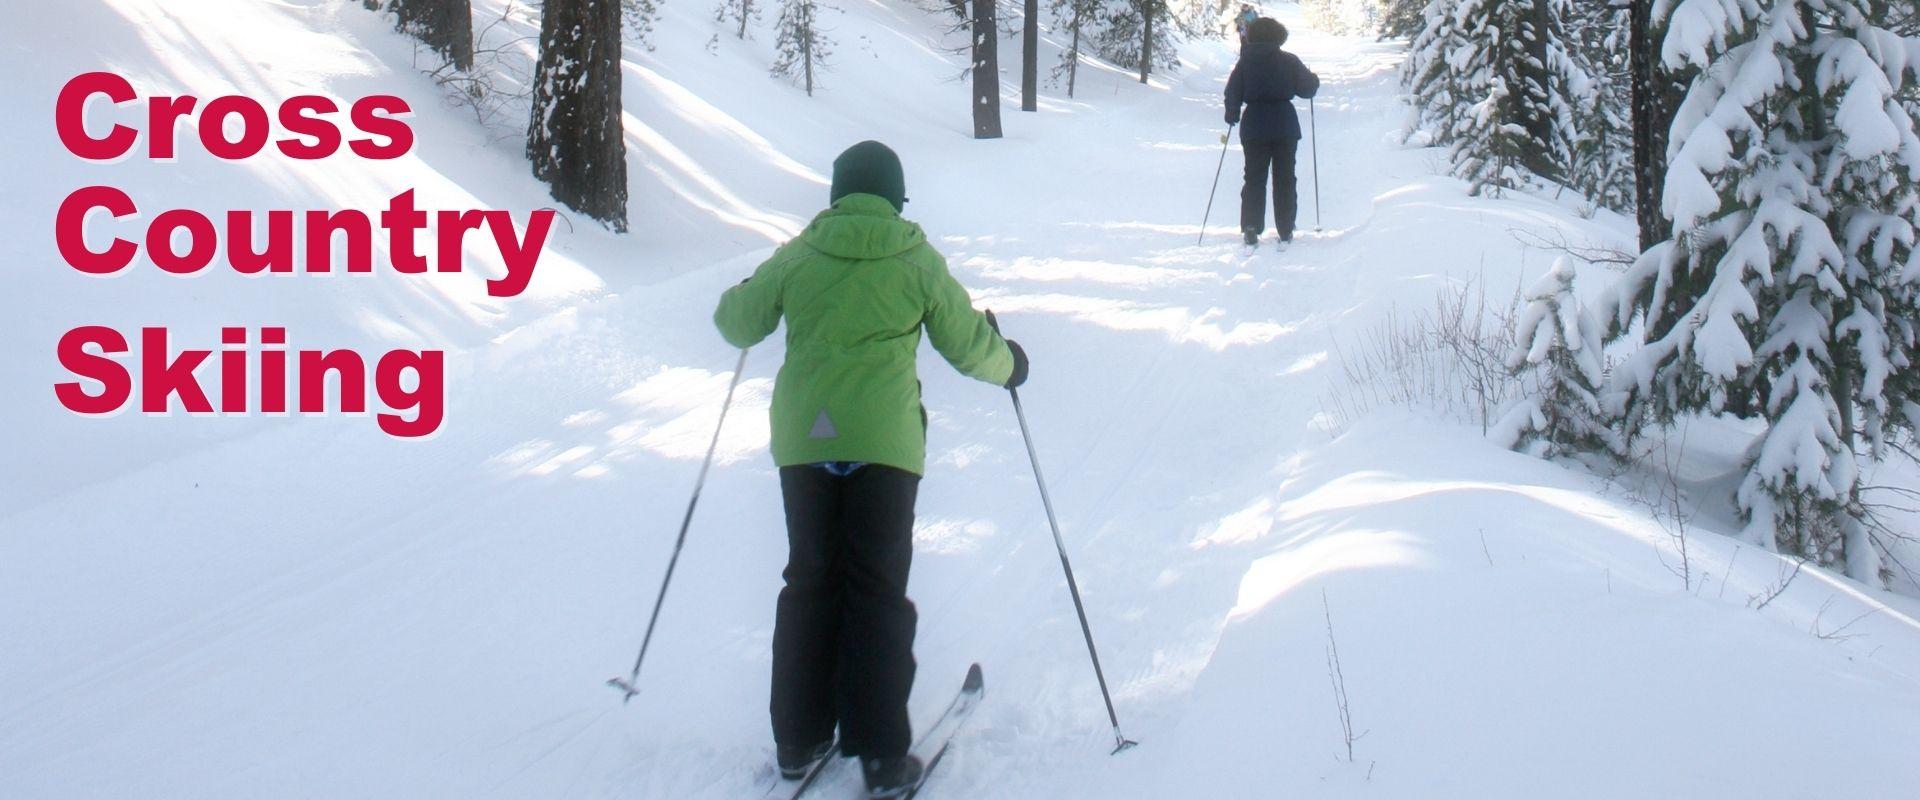 This image shows cross country skiing.